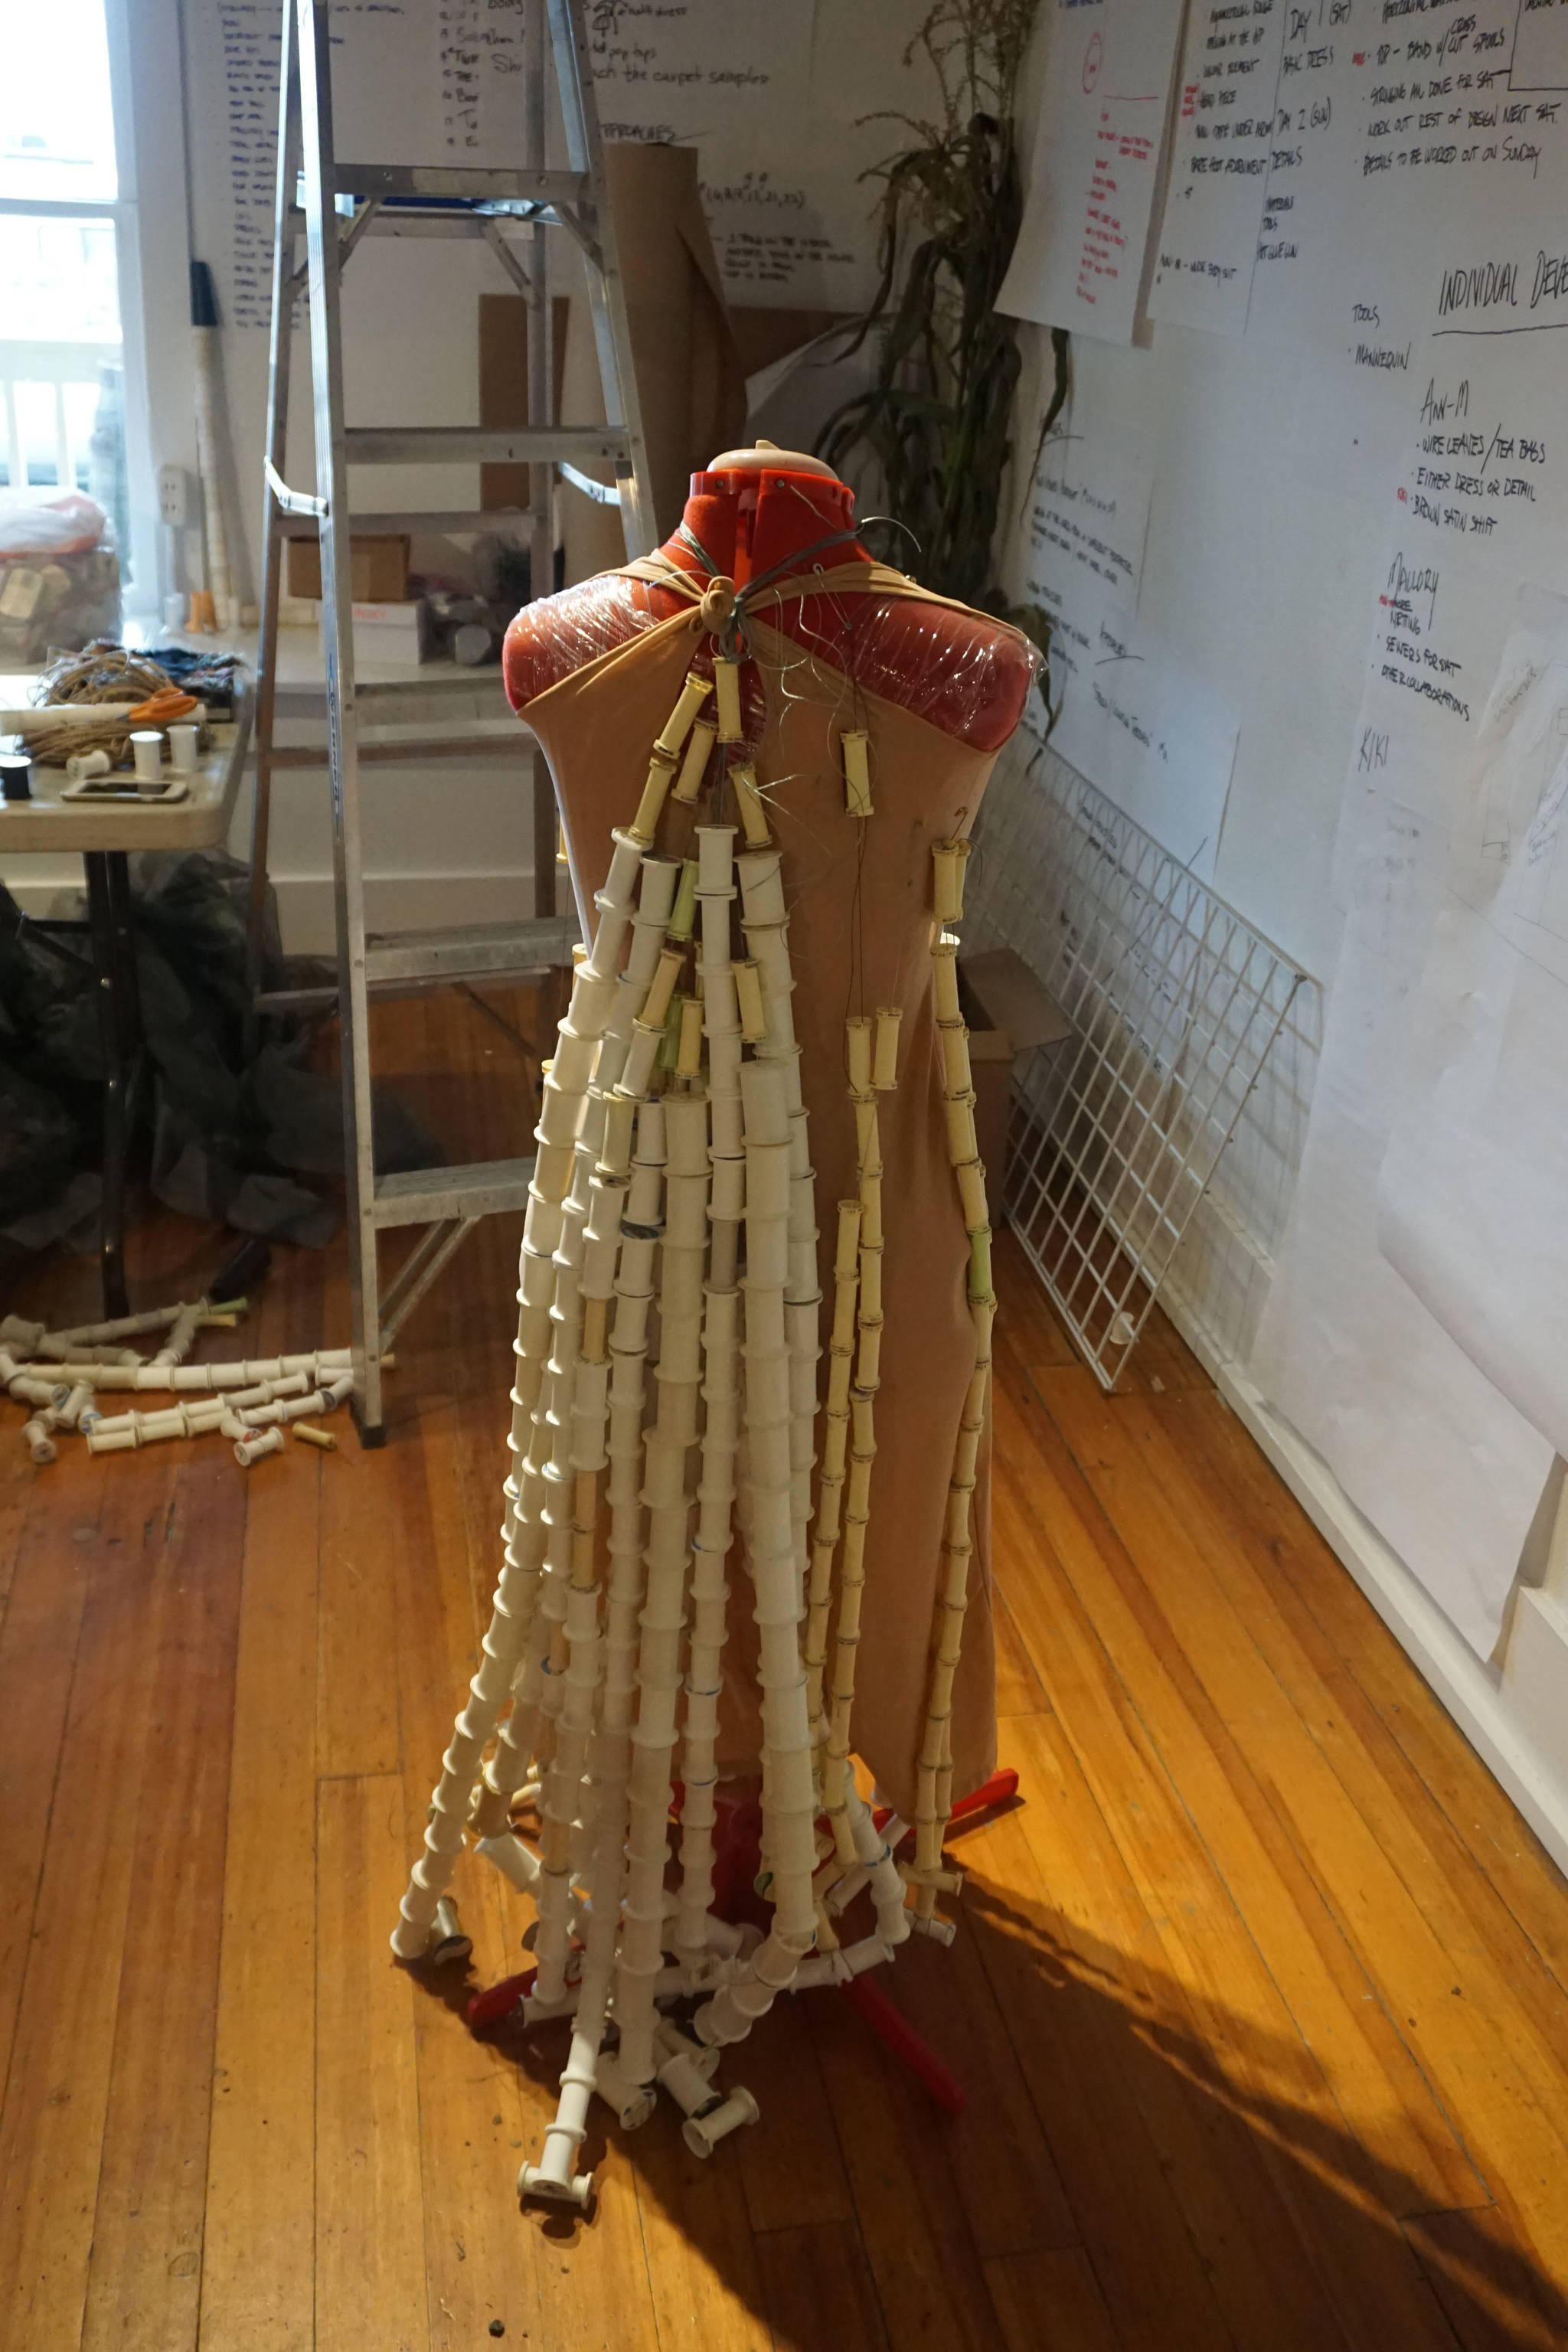 A dress made of sewing thread spindles, shown here Saturday, Oct. 14, 2017 in Homer, Alaska, is one of the Wearable Arts pieces being worked on by participants in a workshop Sheila Wyne held at Bunnell Street Arts Center in October. Wyne is artist in residence at Bunnell at a residency sponsored by the Homer Fiber Arts Collective. (Photo by Michael Armstrong)